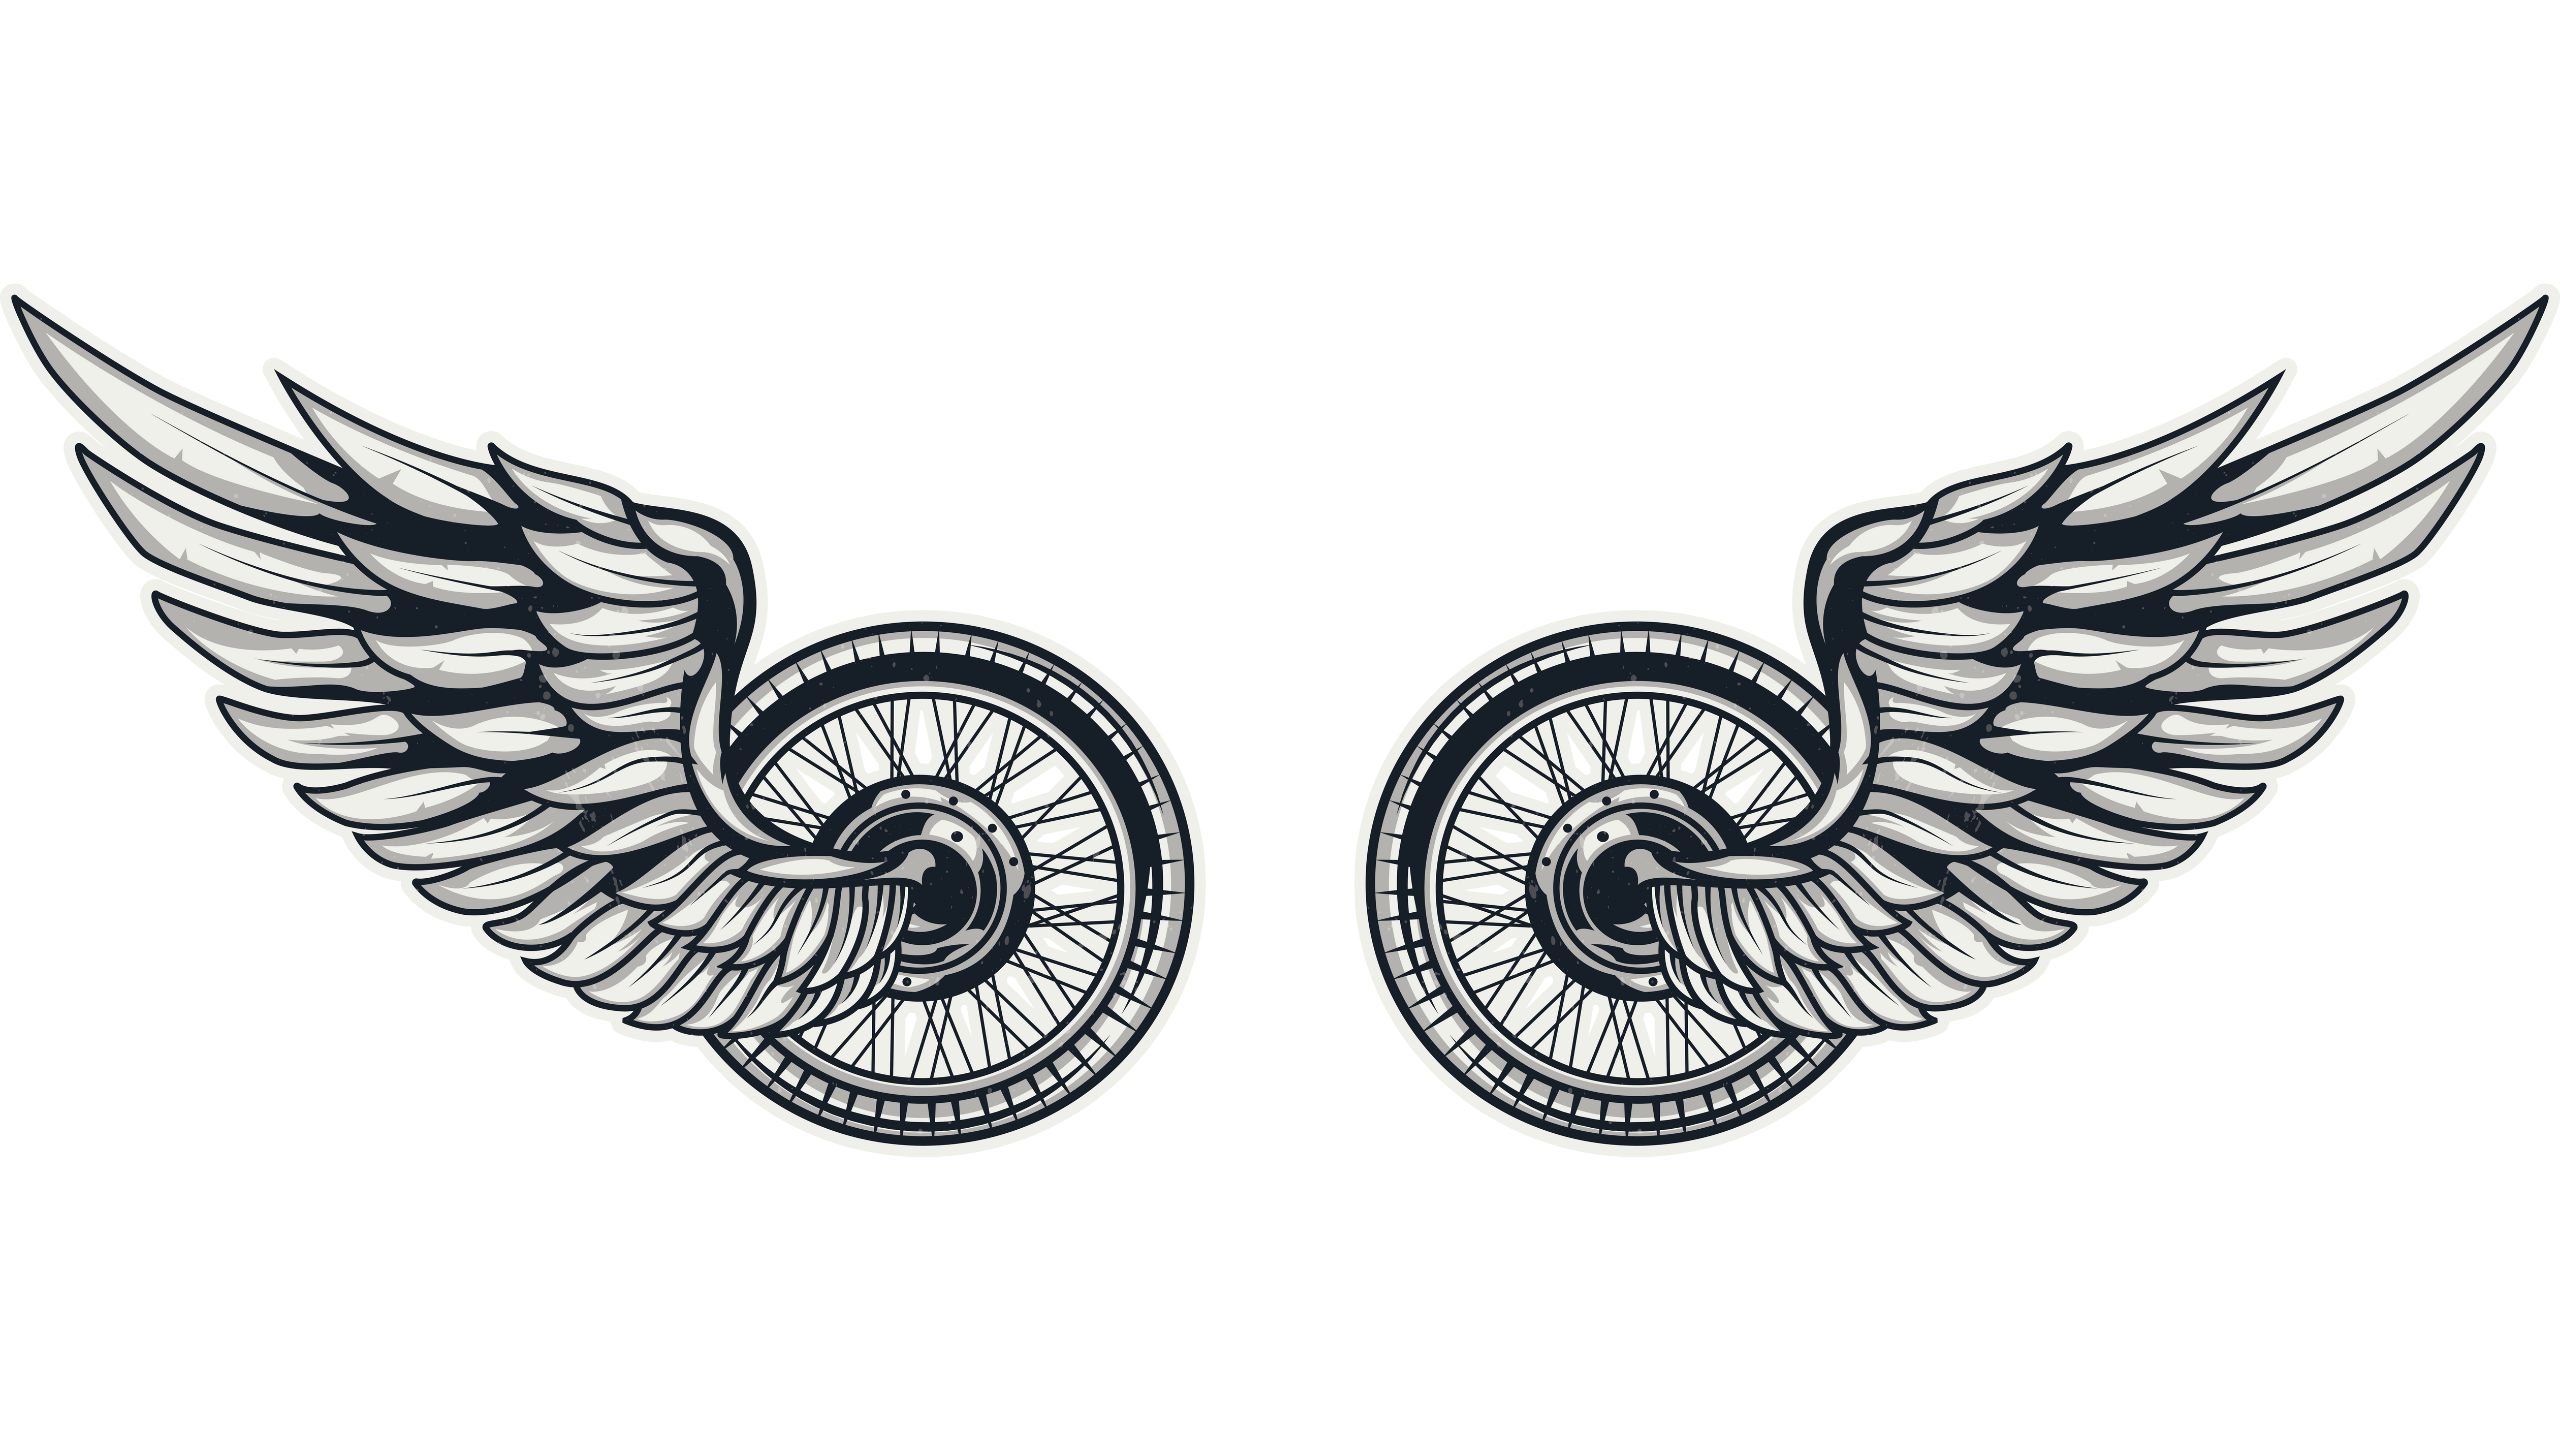 Motorcycle wheels with wings Stickers